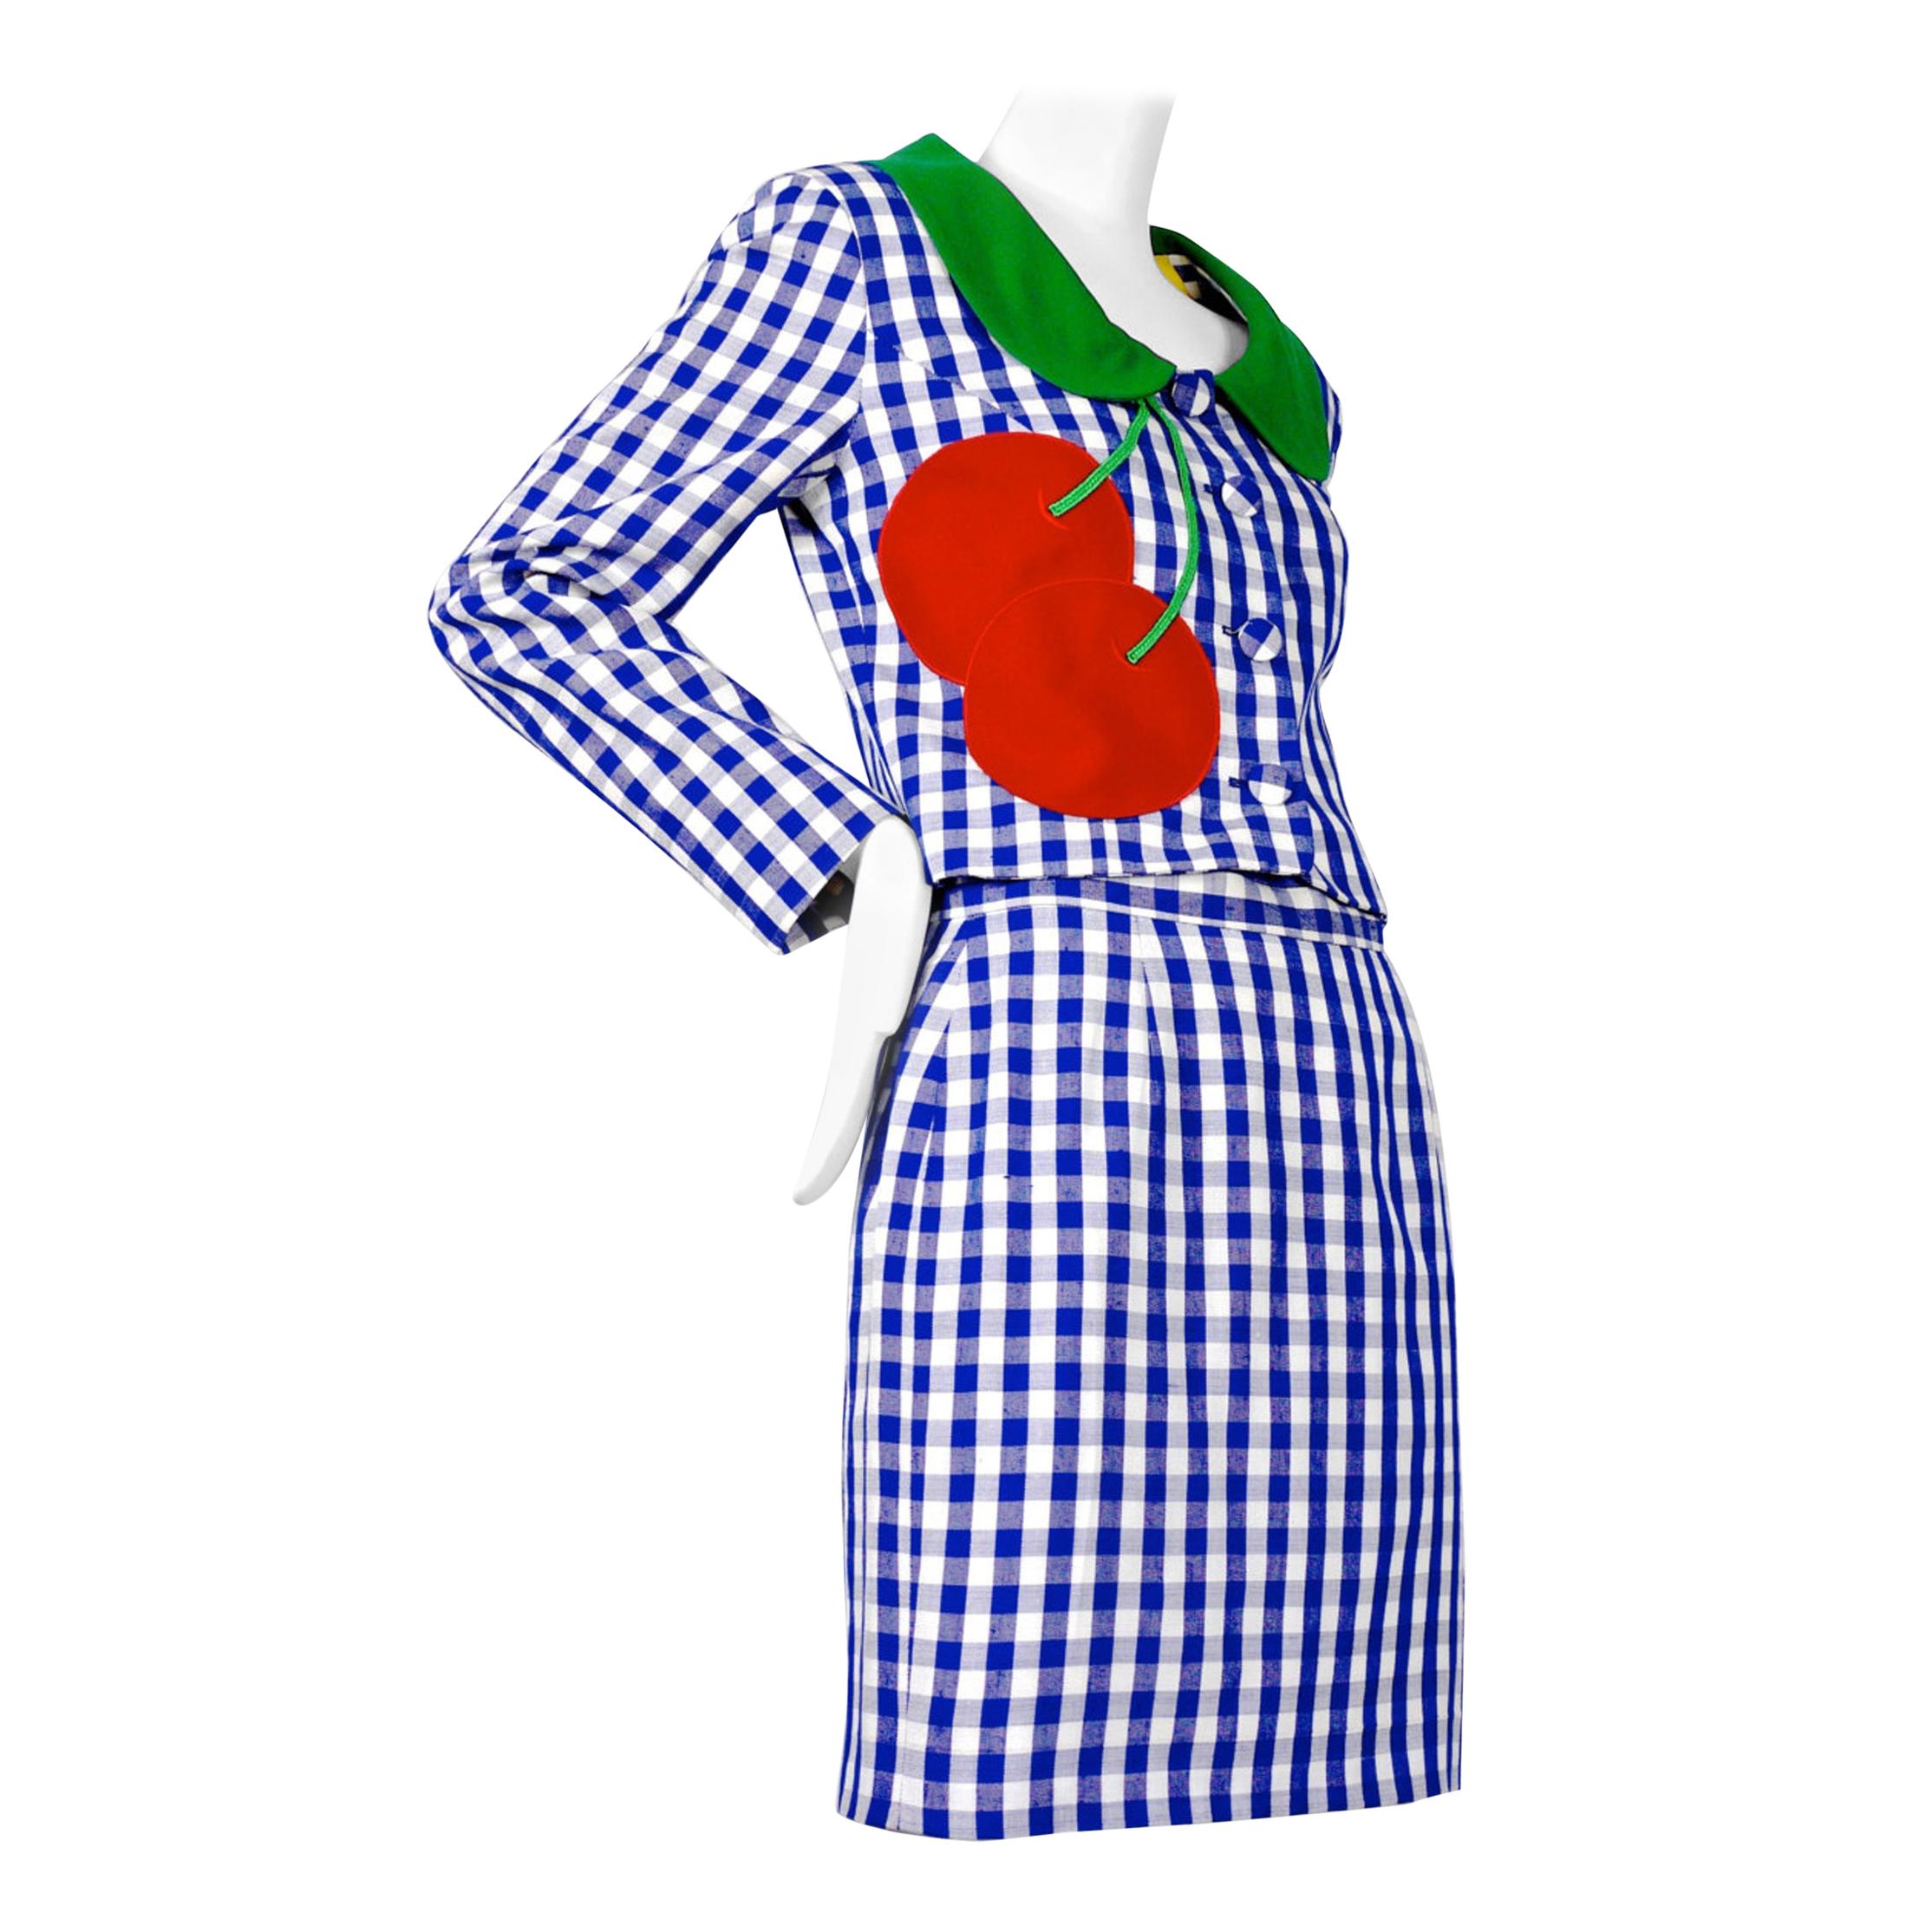 Vintage MOSCHINO Cherry Applique Gingham Jacket Skirt Suit